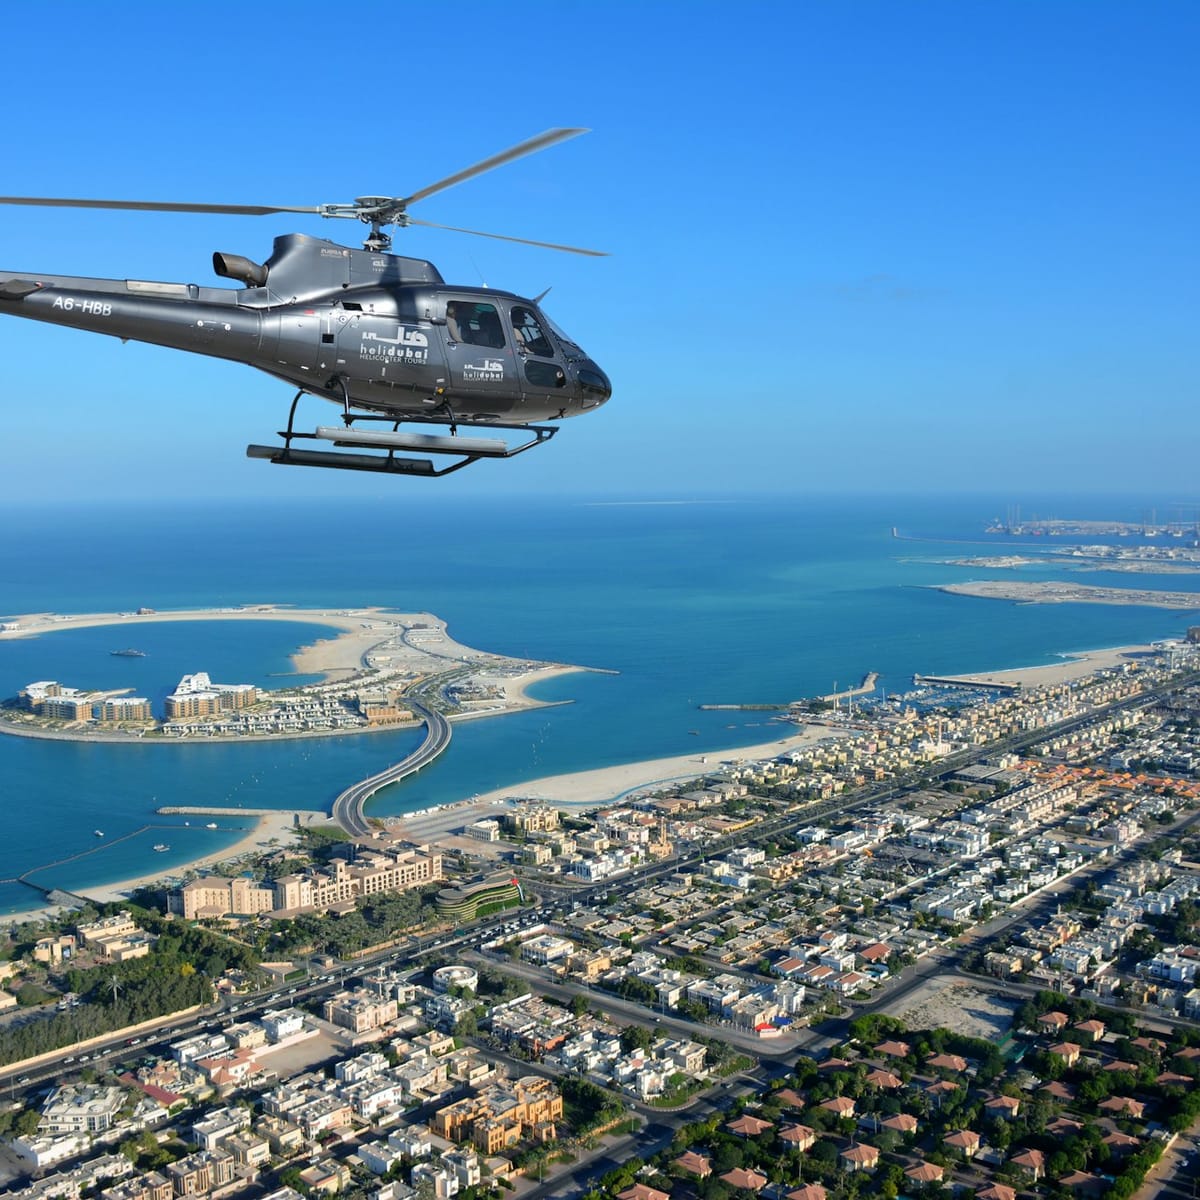 dubai-private-helicopter-ride-40-minute-odyssey-tour_1